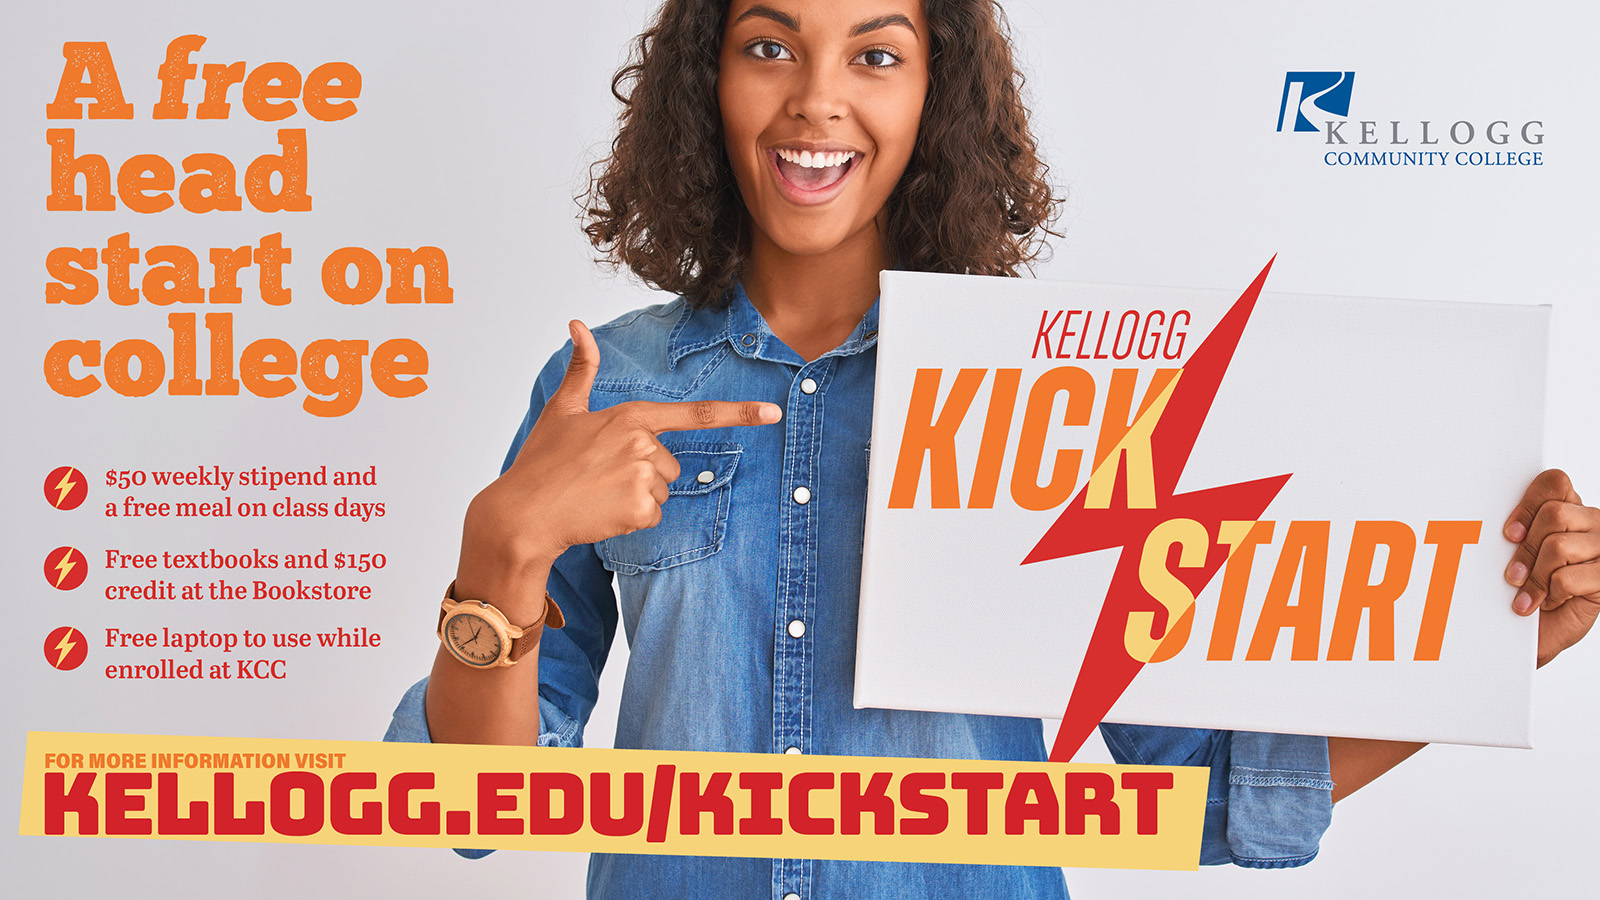 A smiling woman points to a sign she's holding that shows the Kellogg Kickstart lightning bolt logo, on a text slide that reads, "A free head start on college. $50 weekly stipend and a free meal on class days. Free textbooks and $150 credit at the Bookstore. Free laptop to use while enrolled at KCC. For more information visit kellogg.edu/kickstart."